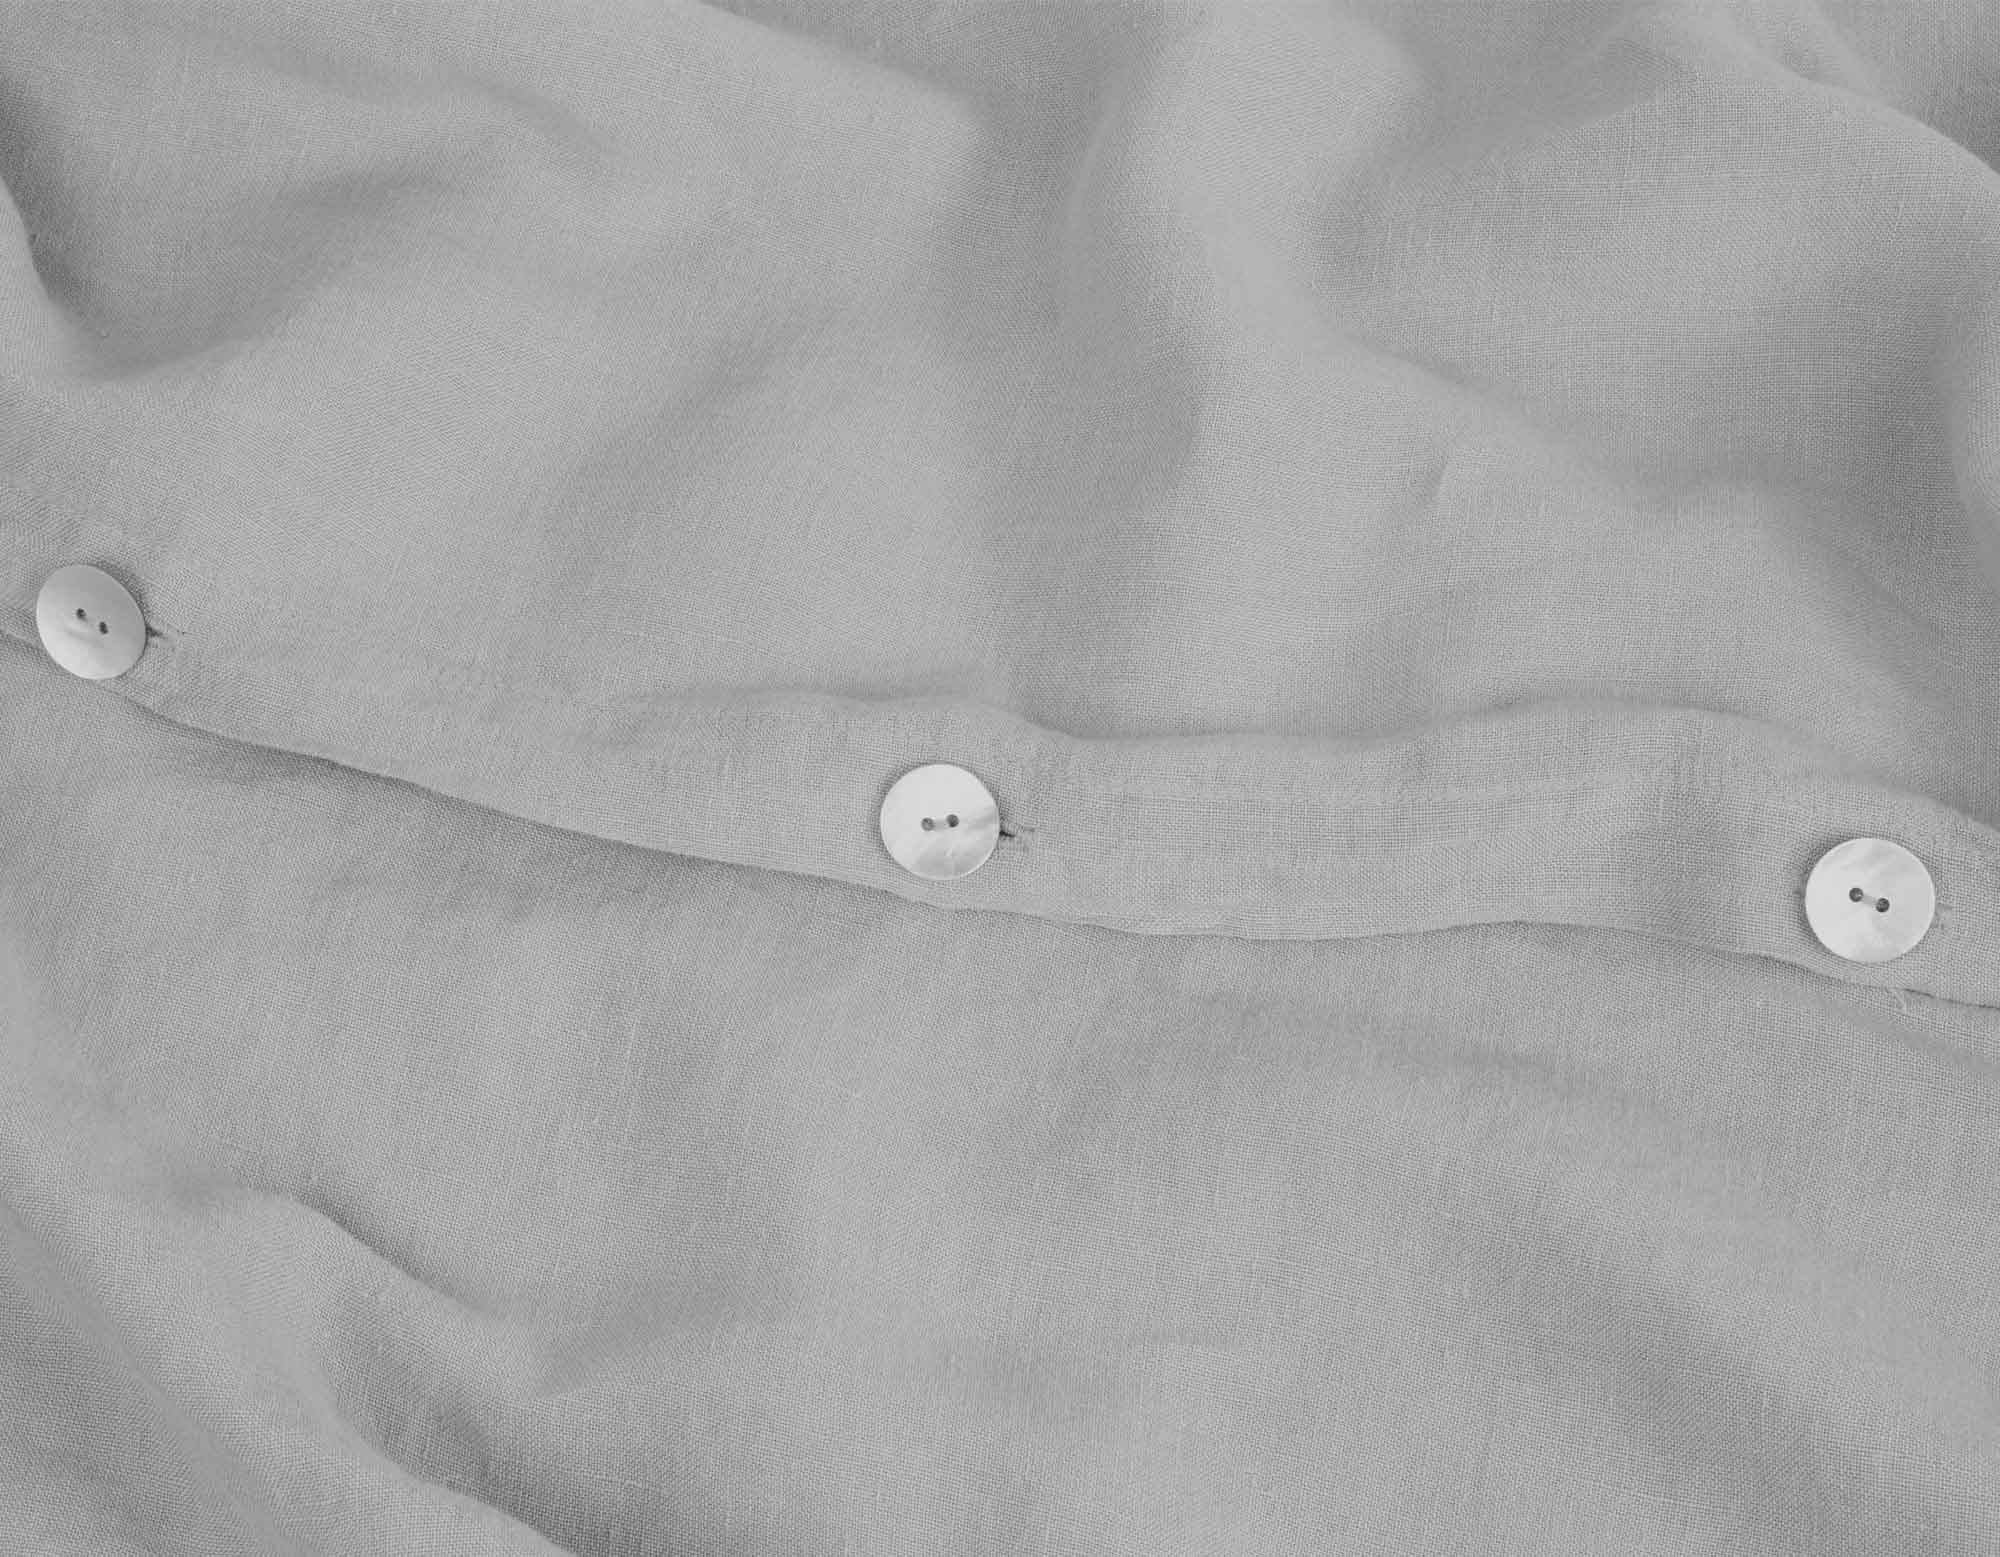 Superking linen duvet cover in grey with close-up of buttons